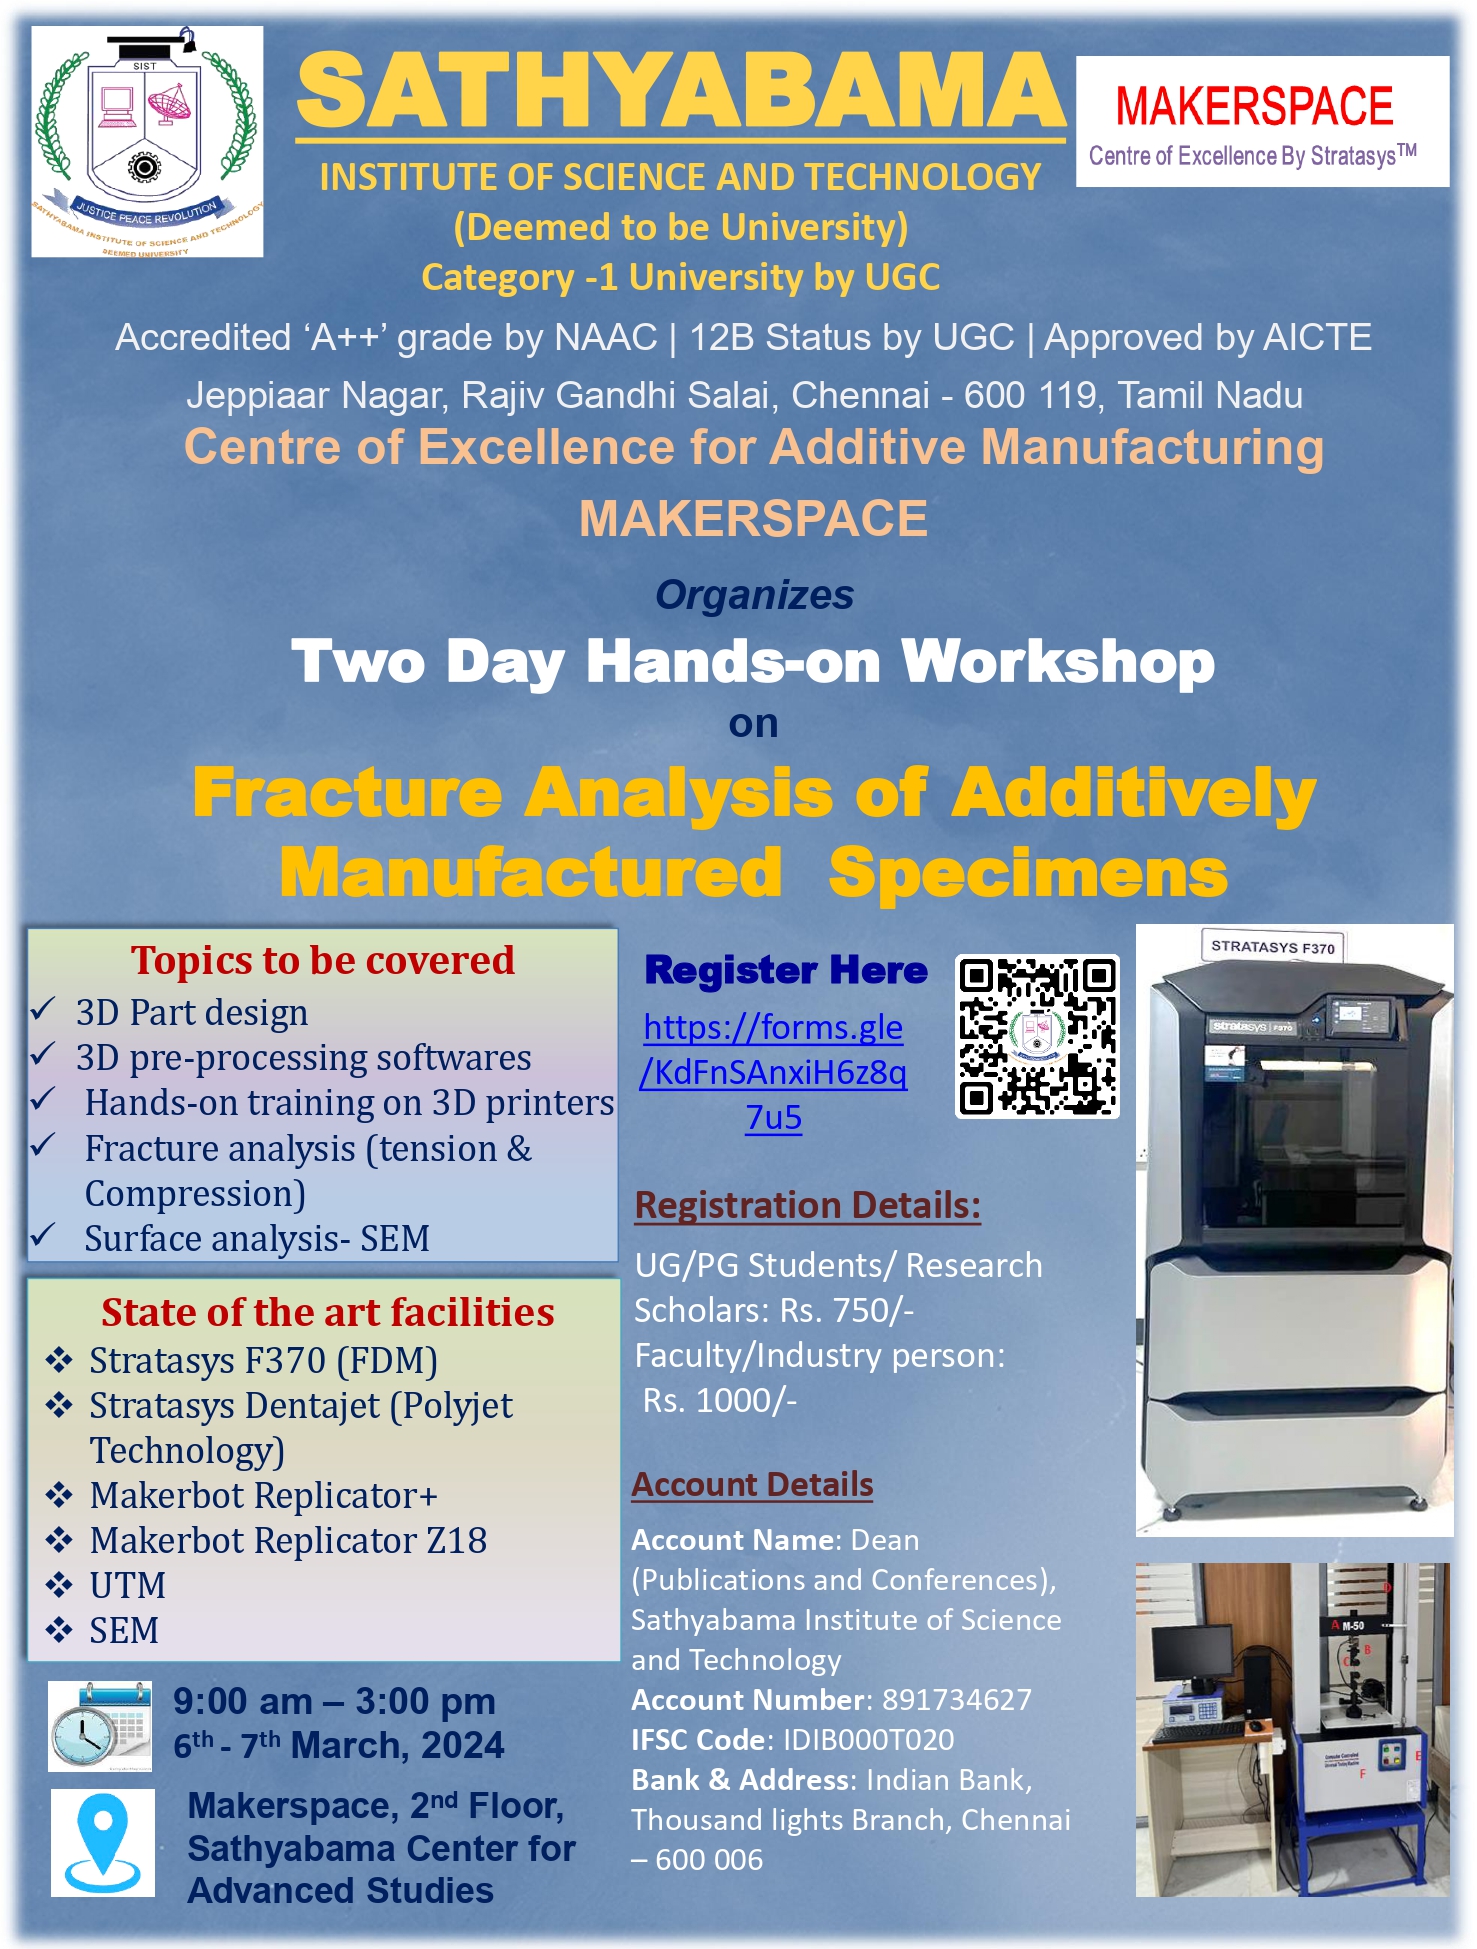 Two day Hands-on Workshop on Fracture analysis of additively manufactured specimens